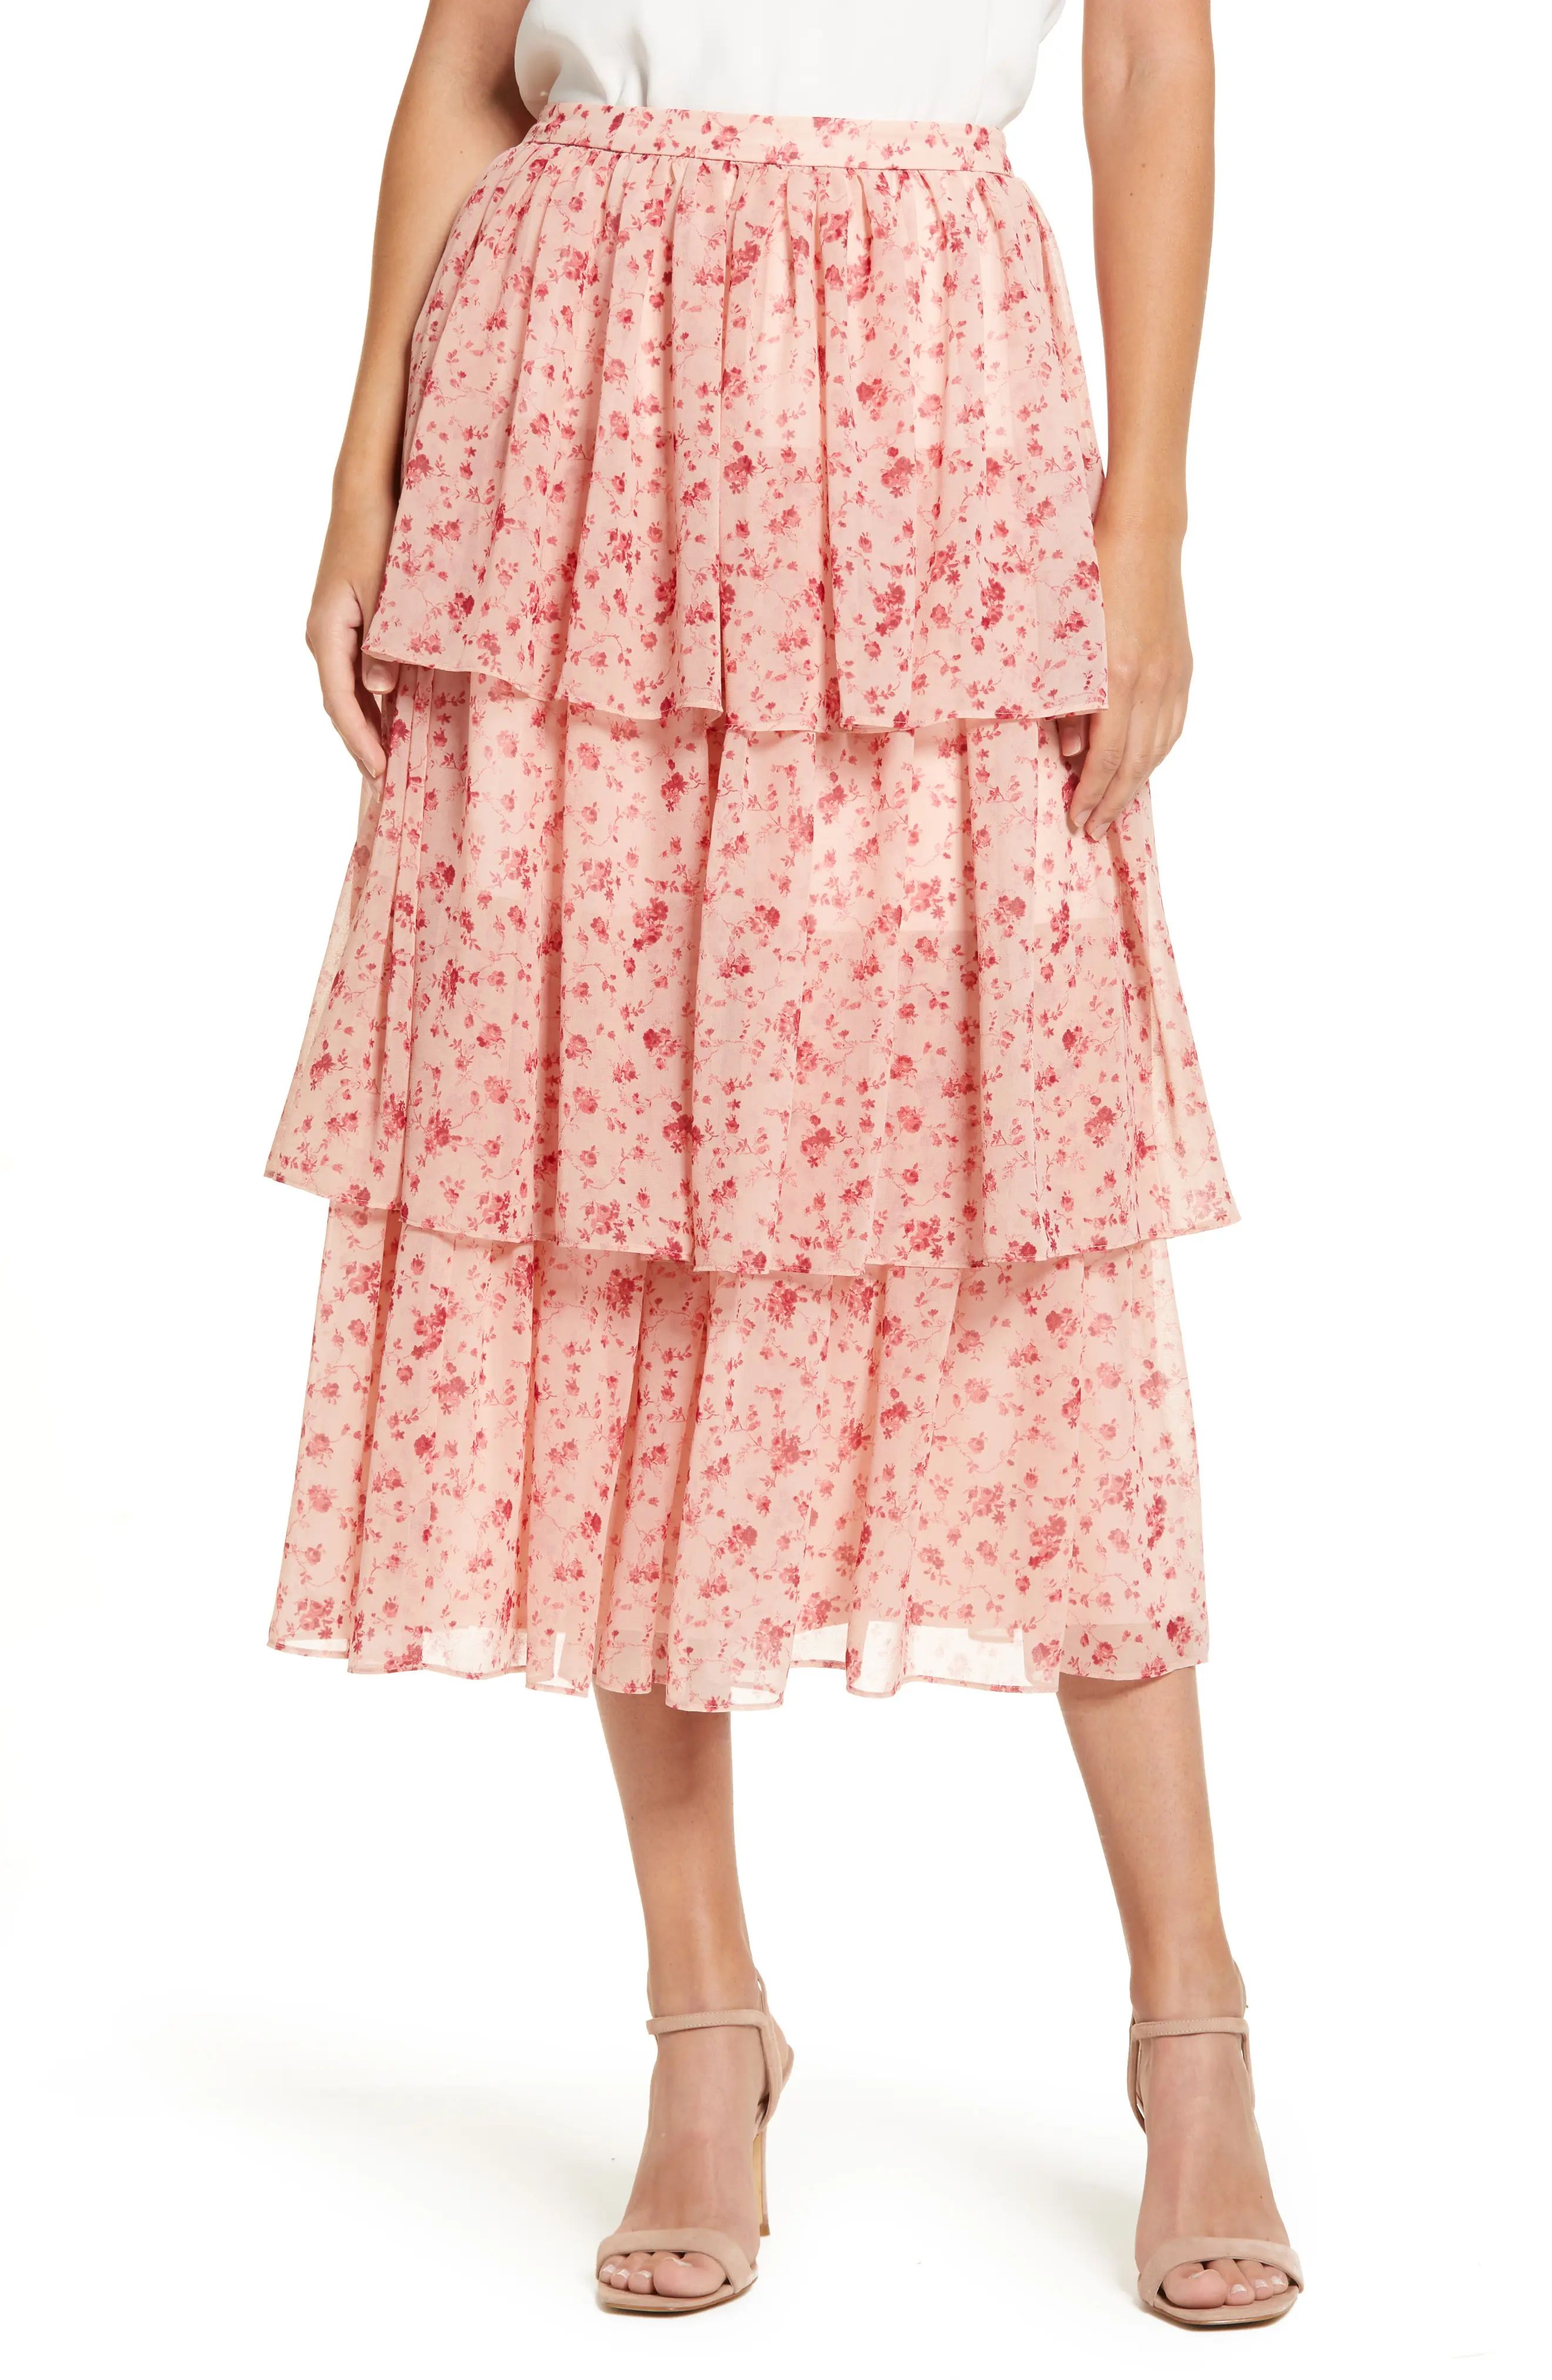 Women's Rachel Parcell Print Tiered Ruffle Skirt, Size X-Large - Pink (Nordstrom Exclusive) | Nordstrom